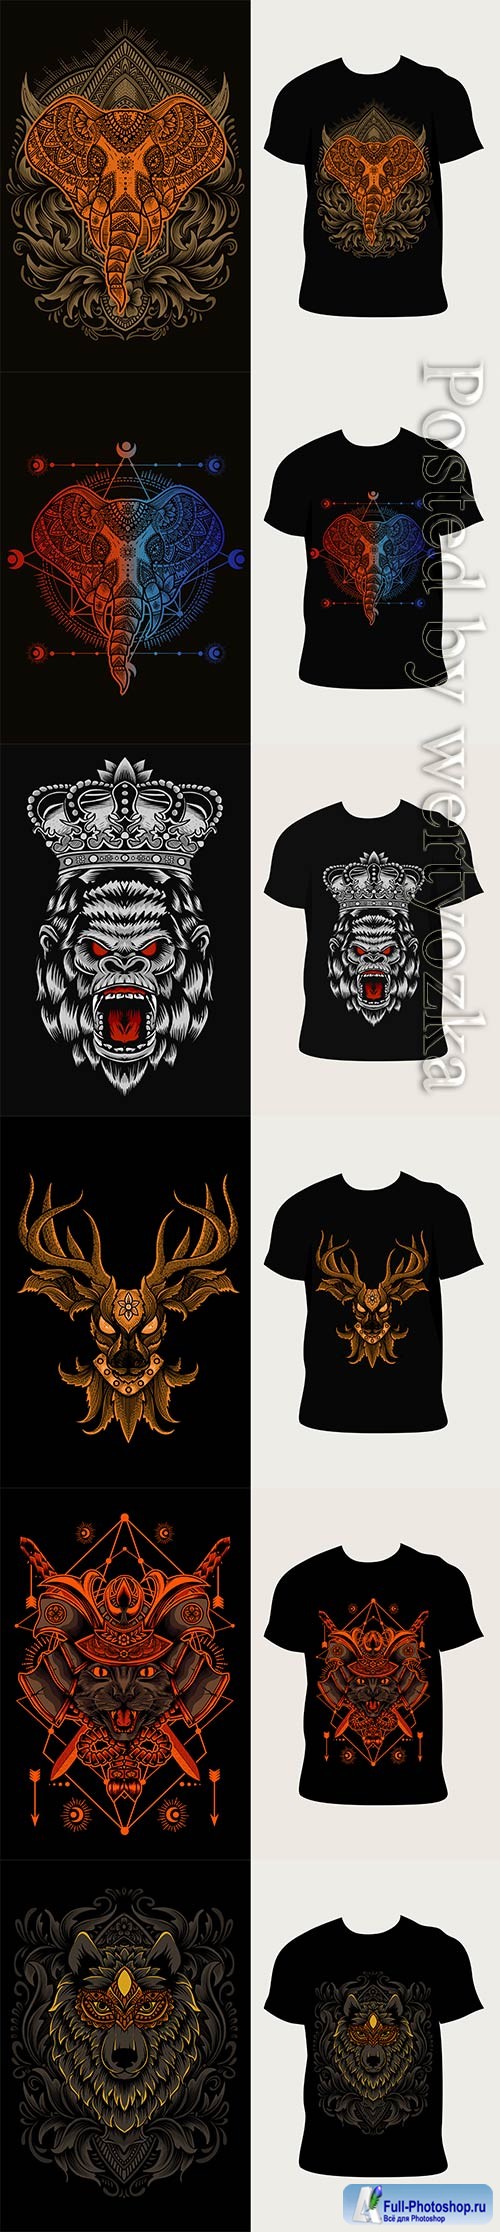 Vector illustration with t-shirt design